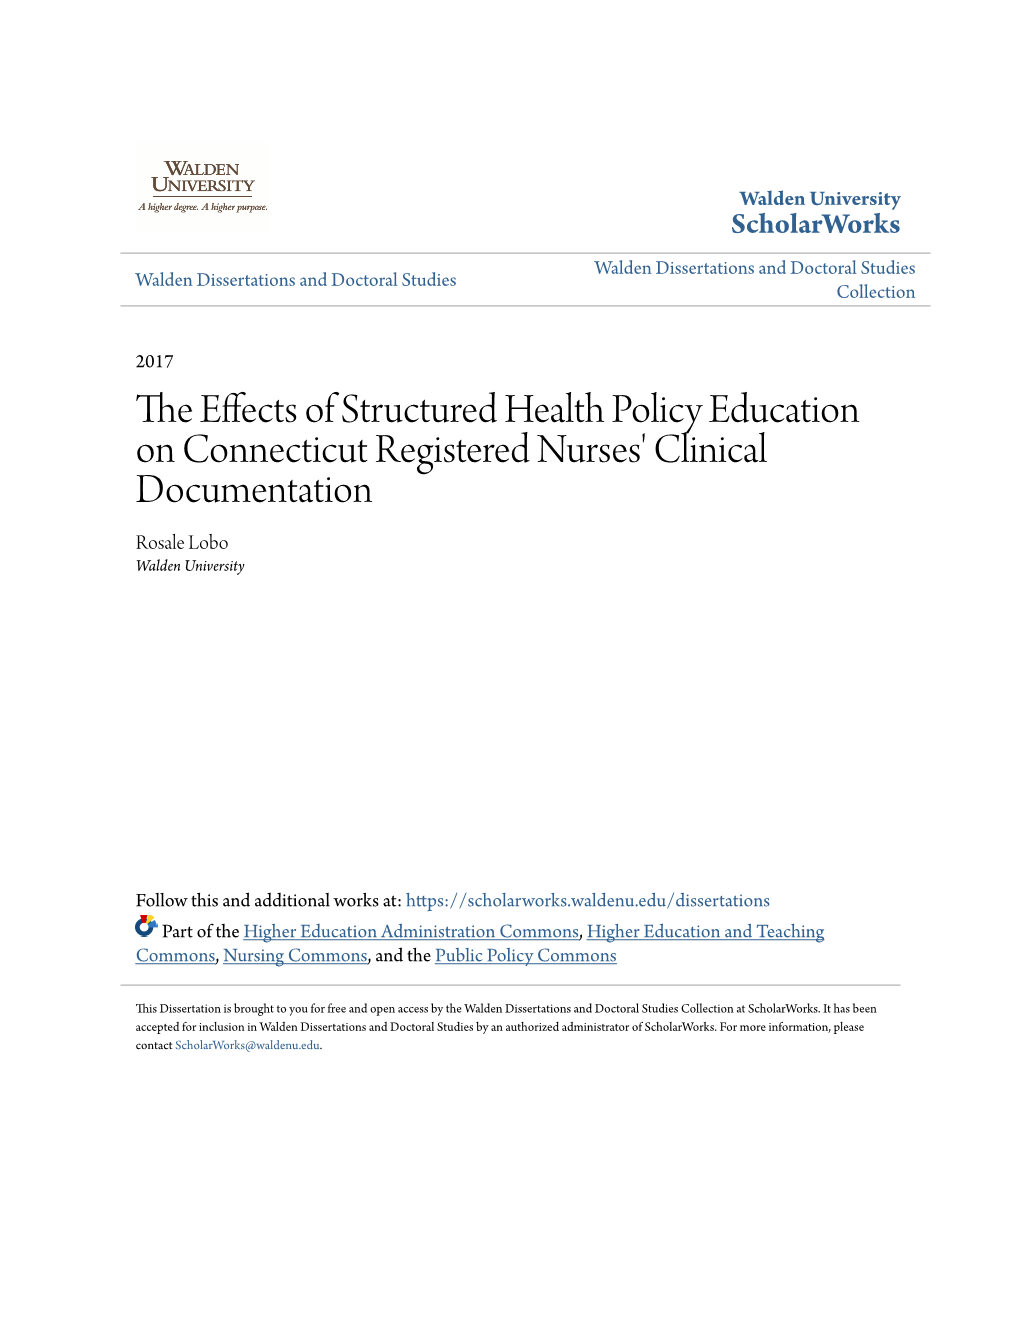 The Effects of Structured Health Policy Education on Connecticut Registered Nurses' Clinical Documentation